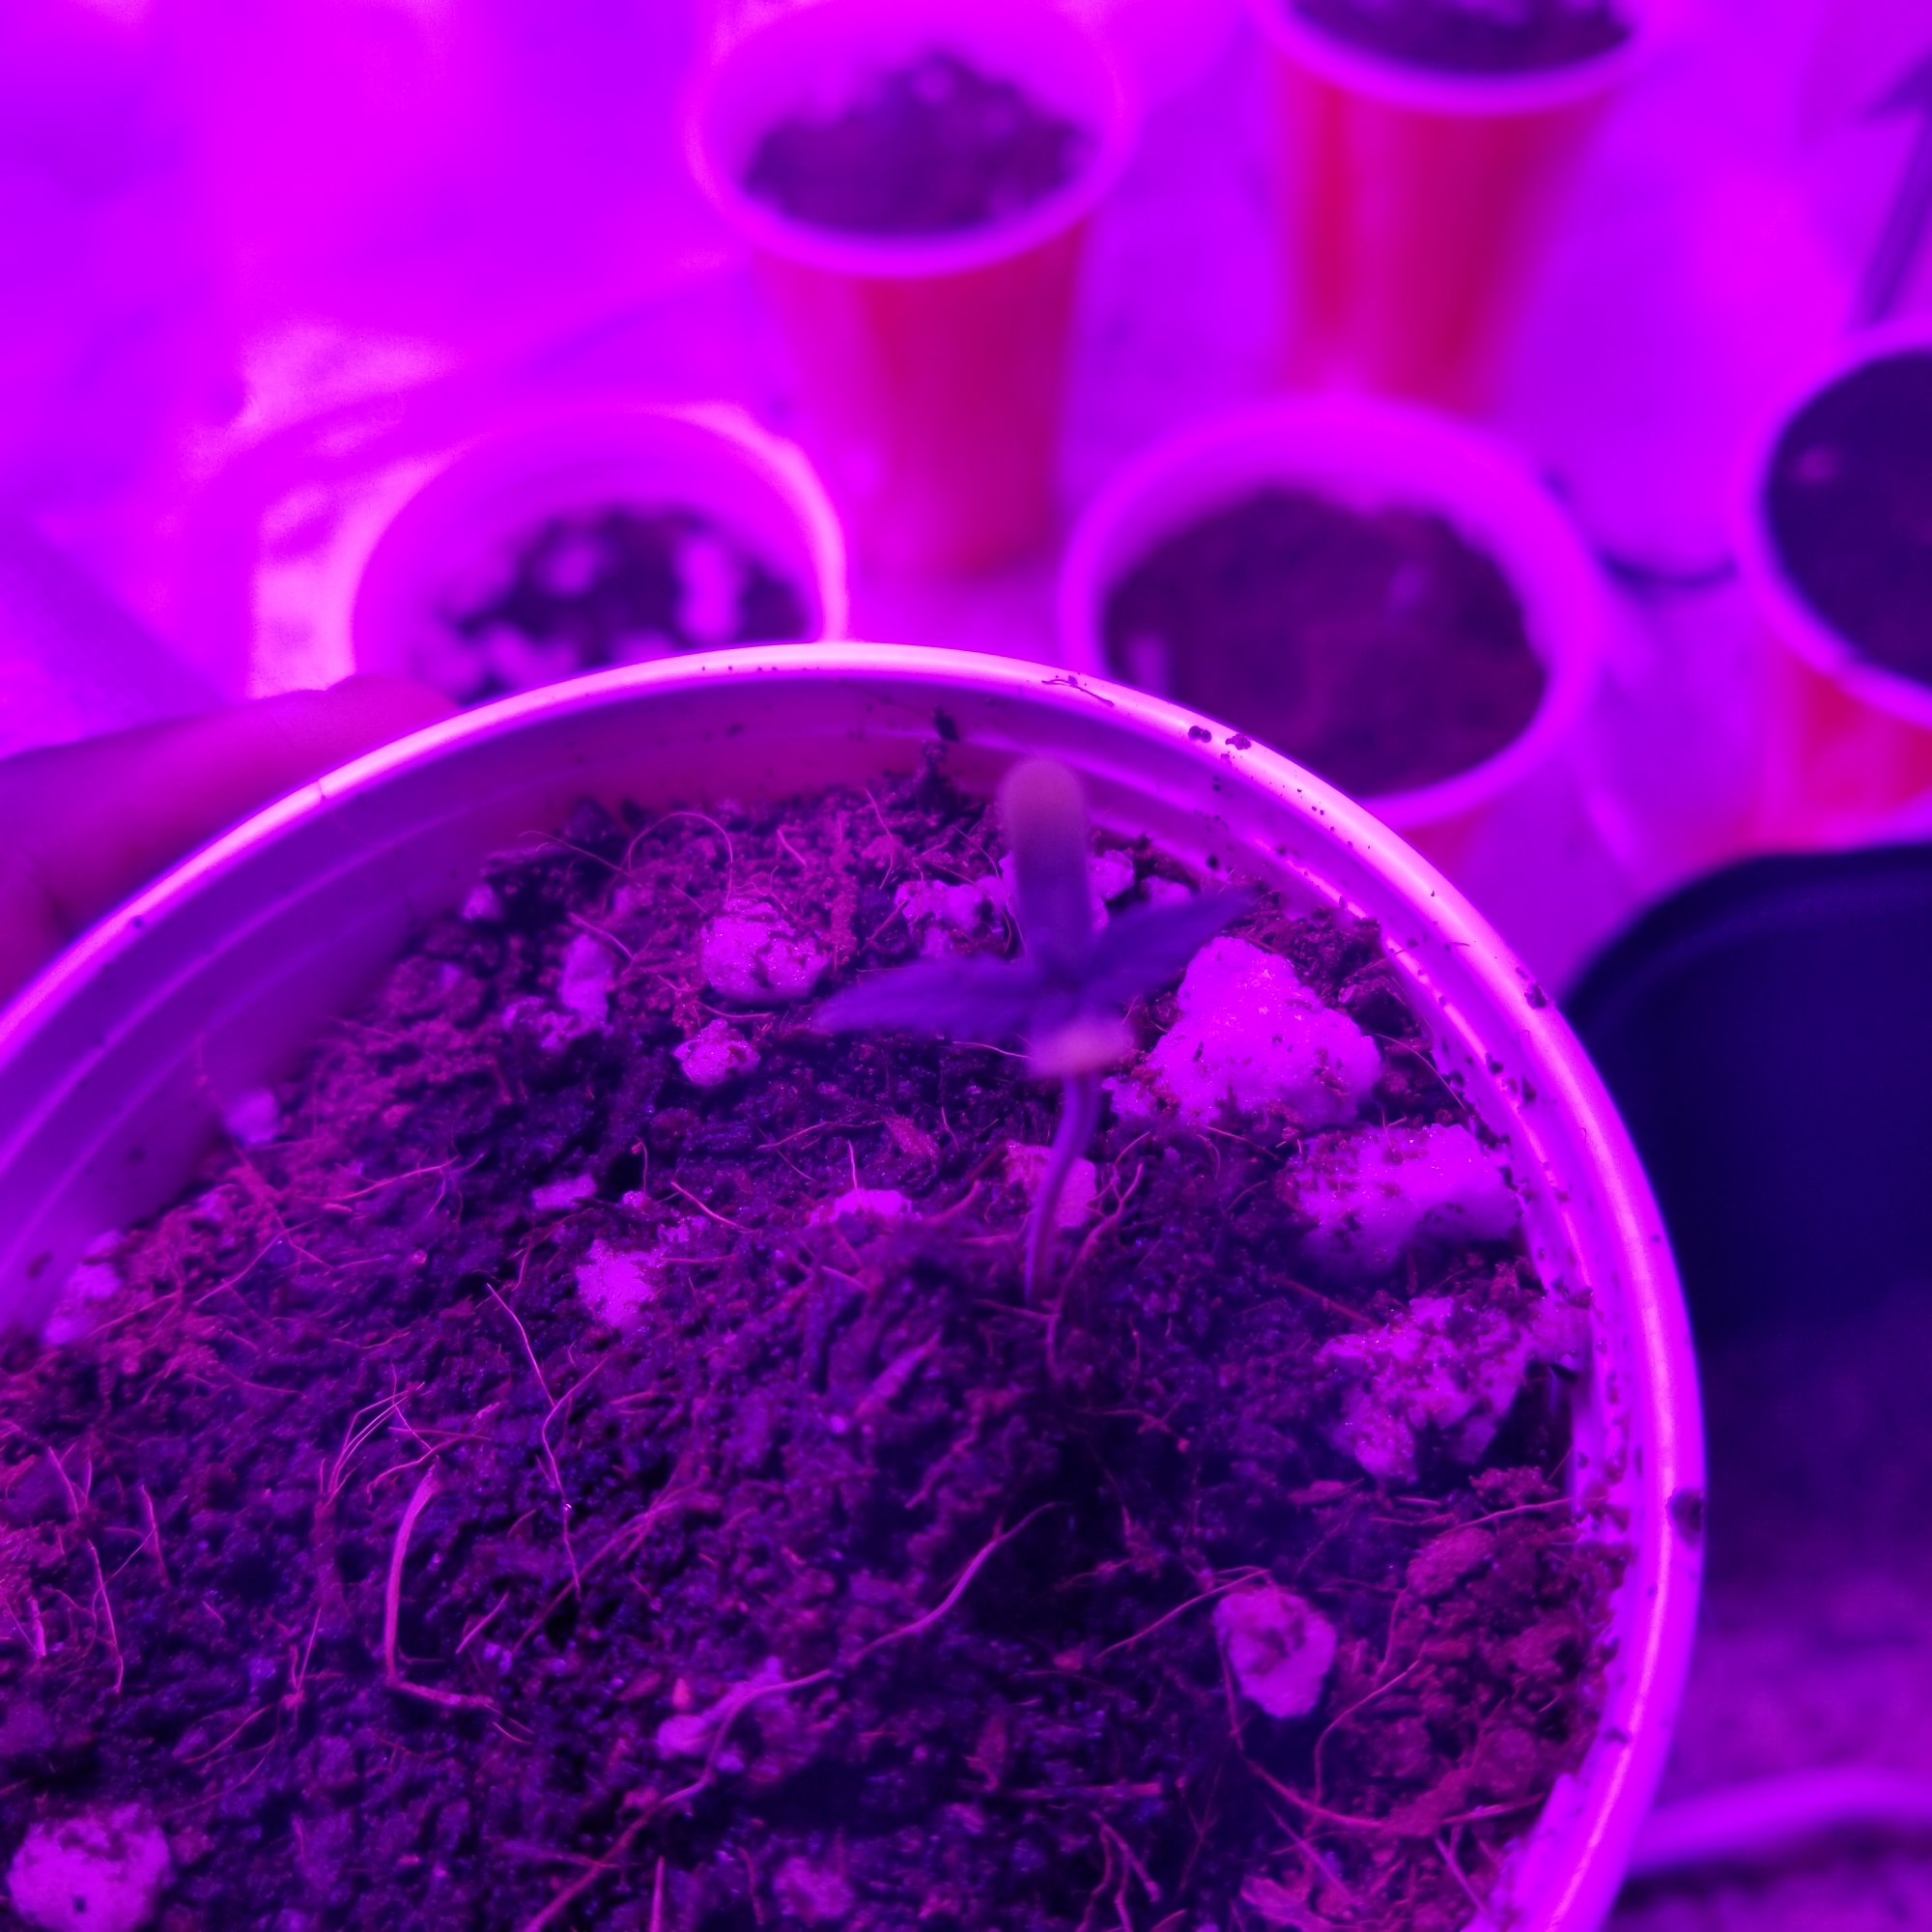 Please help my seedlings are dying 8